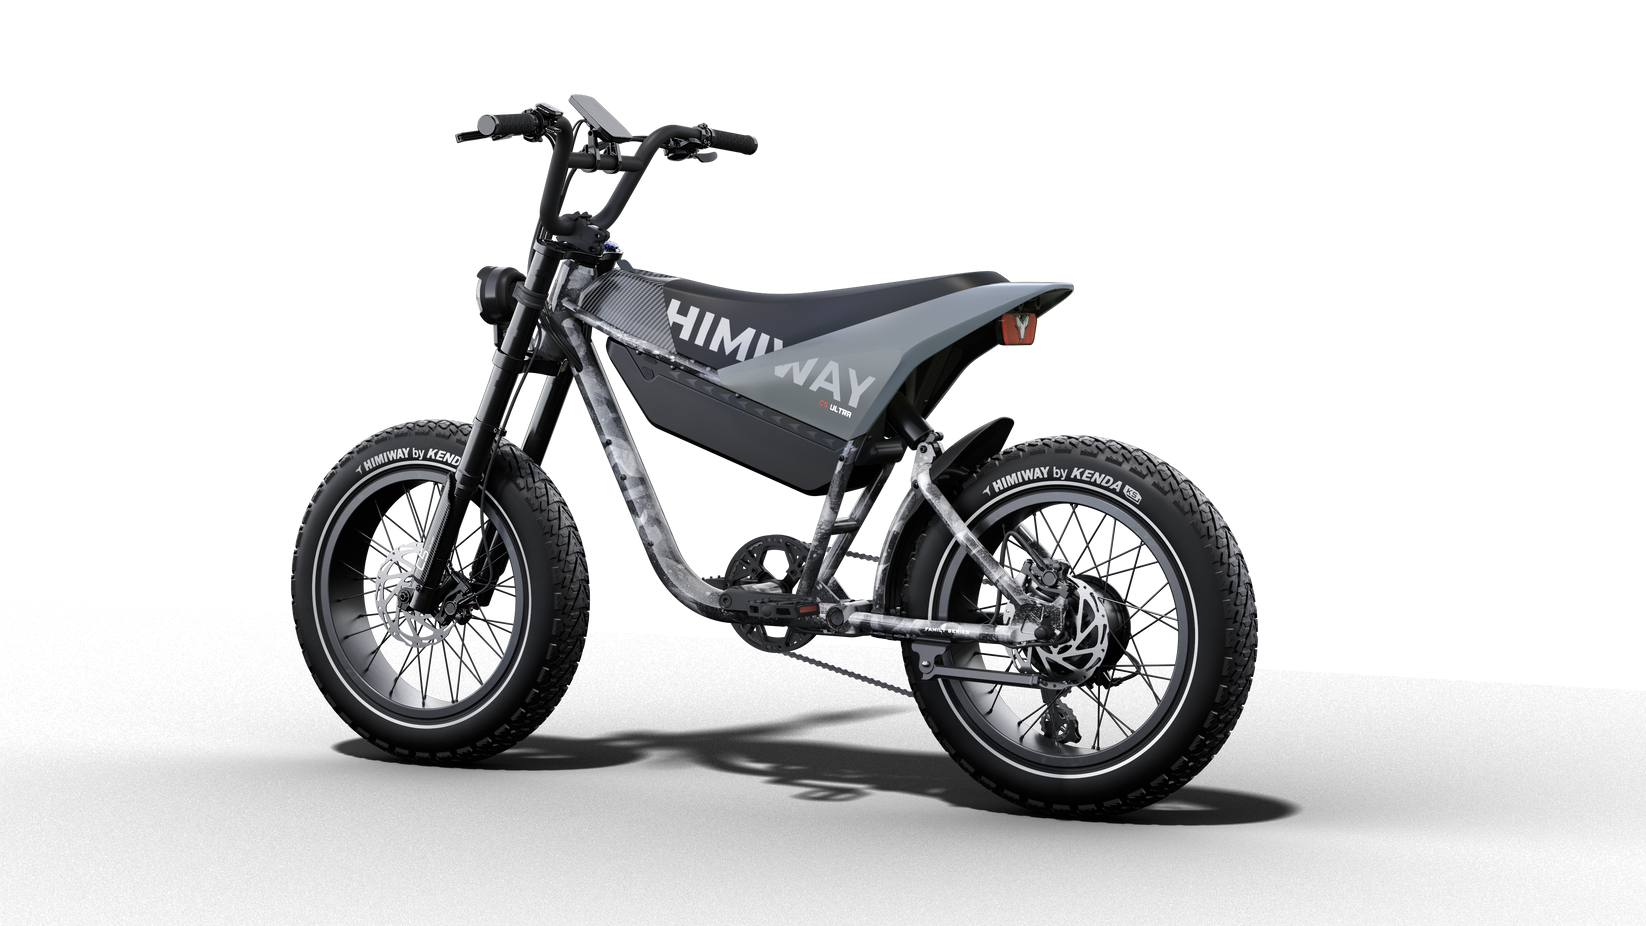 Black and gray Himiway - C5 with thick tires and a large saddle, featuring an advanced torque sensor for improved performance, displayed on a plain black background.